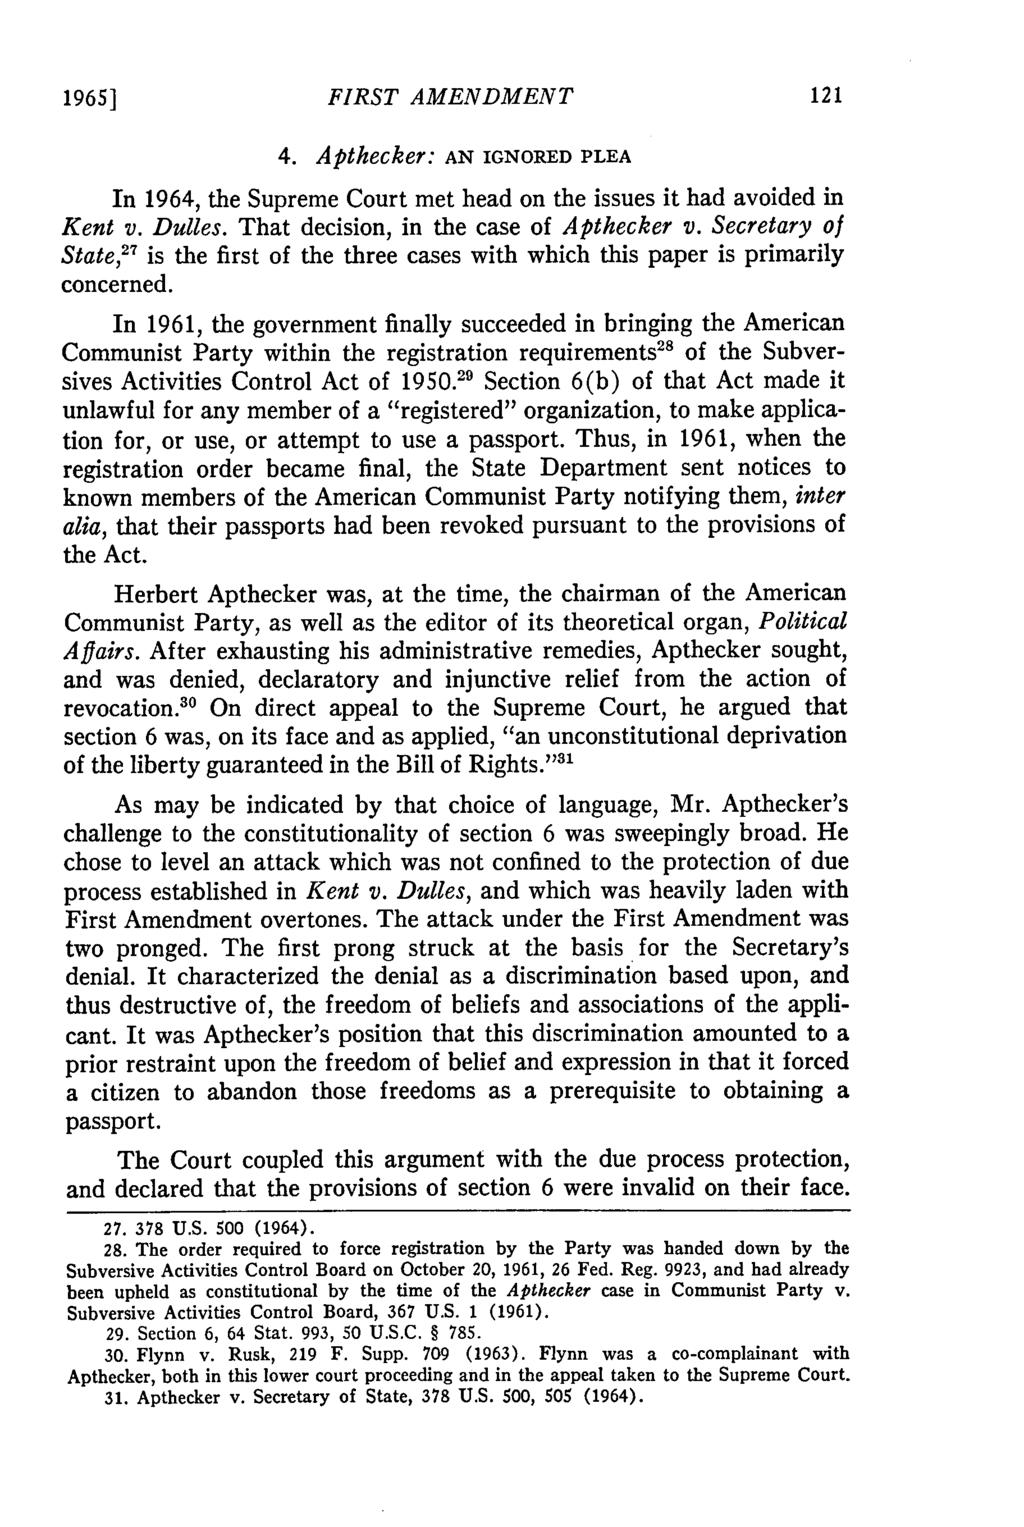 1965] FIRST AMENDMENT 4. Apthecker: AN IGNORED PLEA In 1964, the Supreme Court met head on the issues it had avoided in Kent v. Dulles. That decision, in the case of Apthecker v.